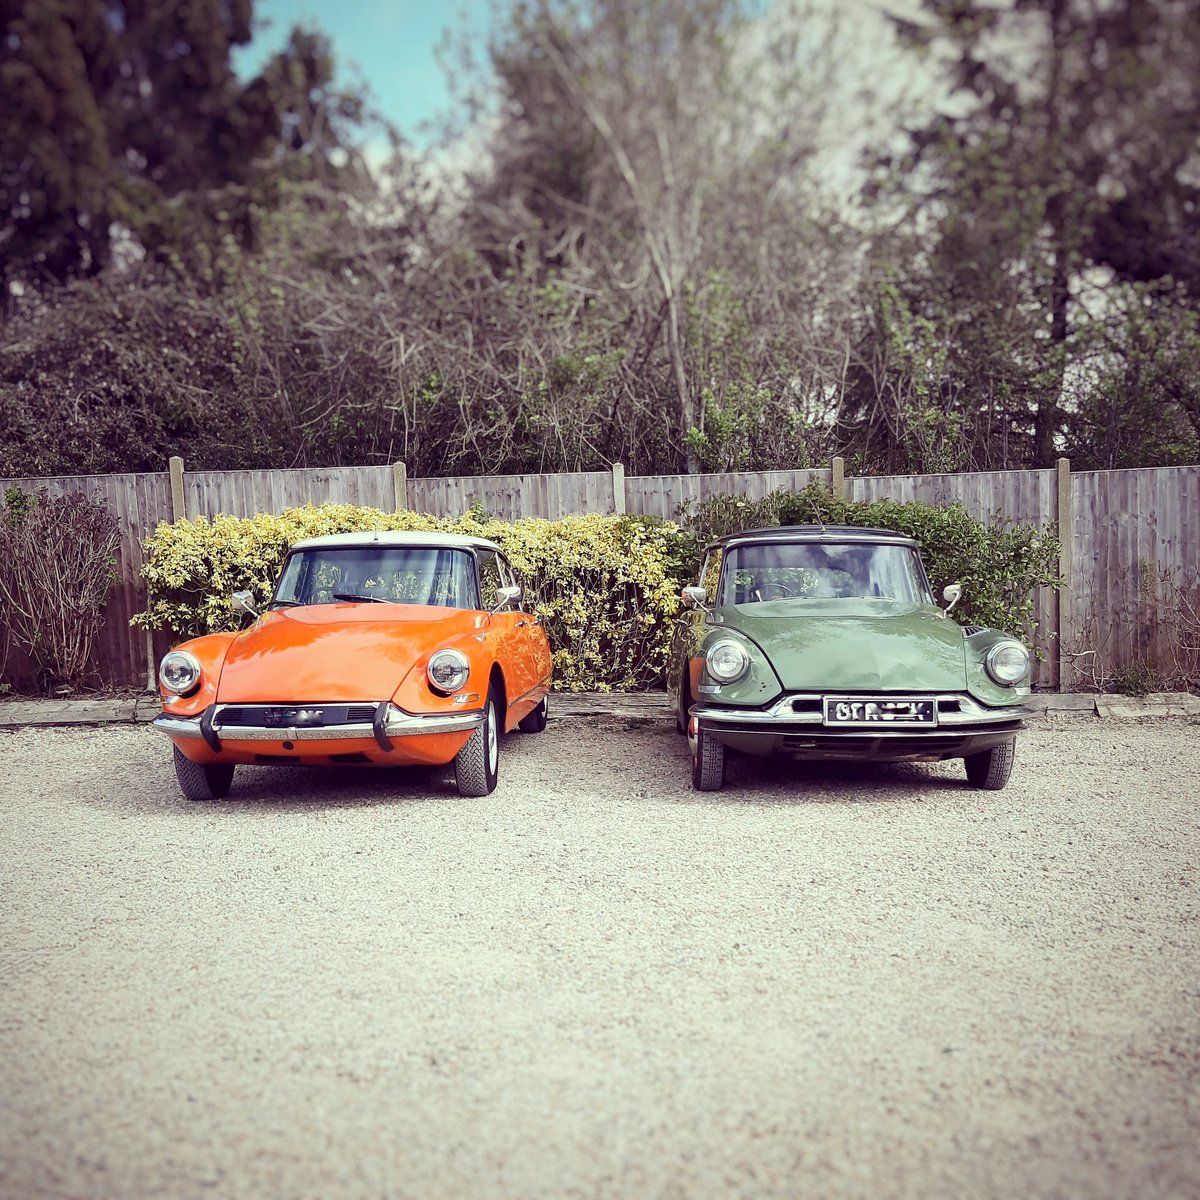 These 2 celebrated Drive It Day with a few other cars.
#DriveItDay #citroencarclub